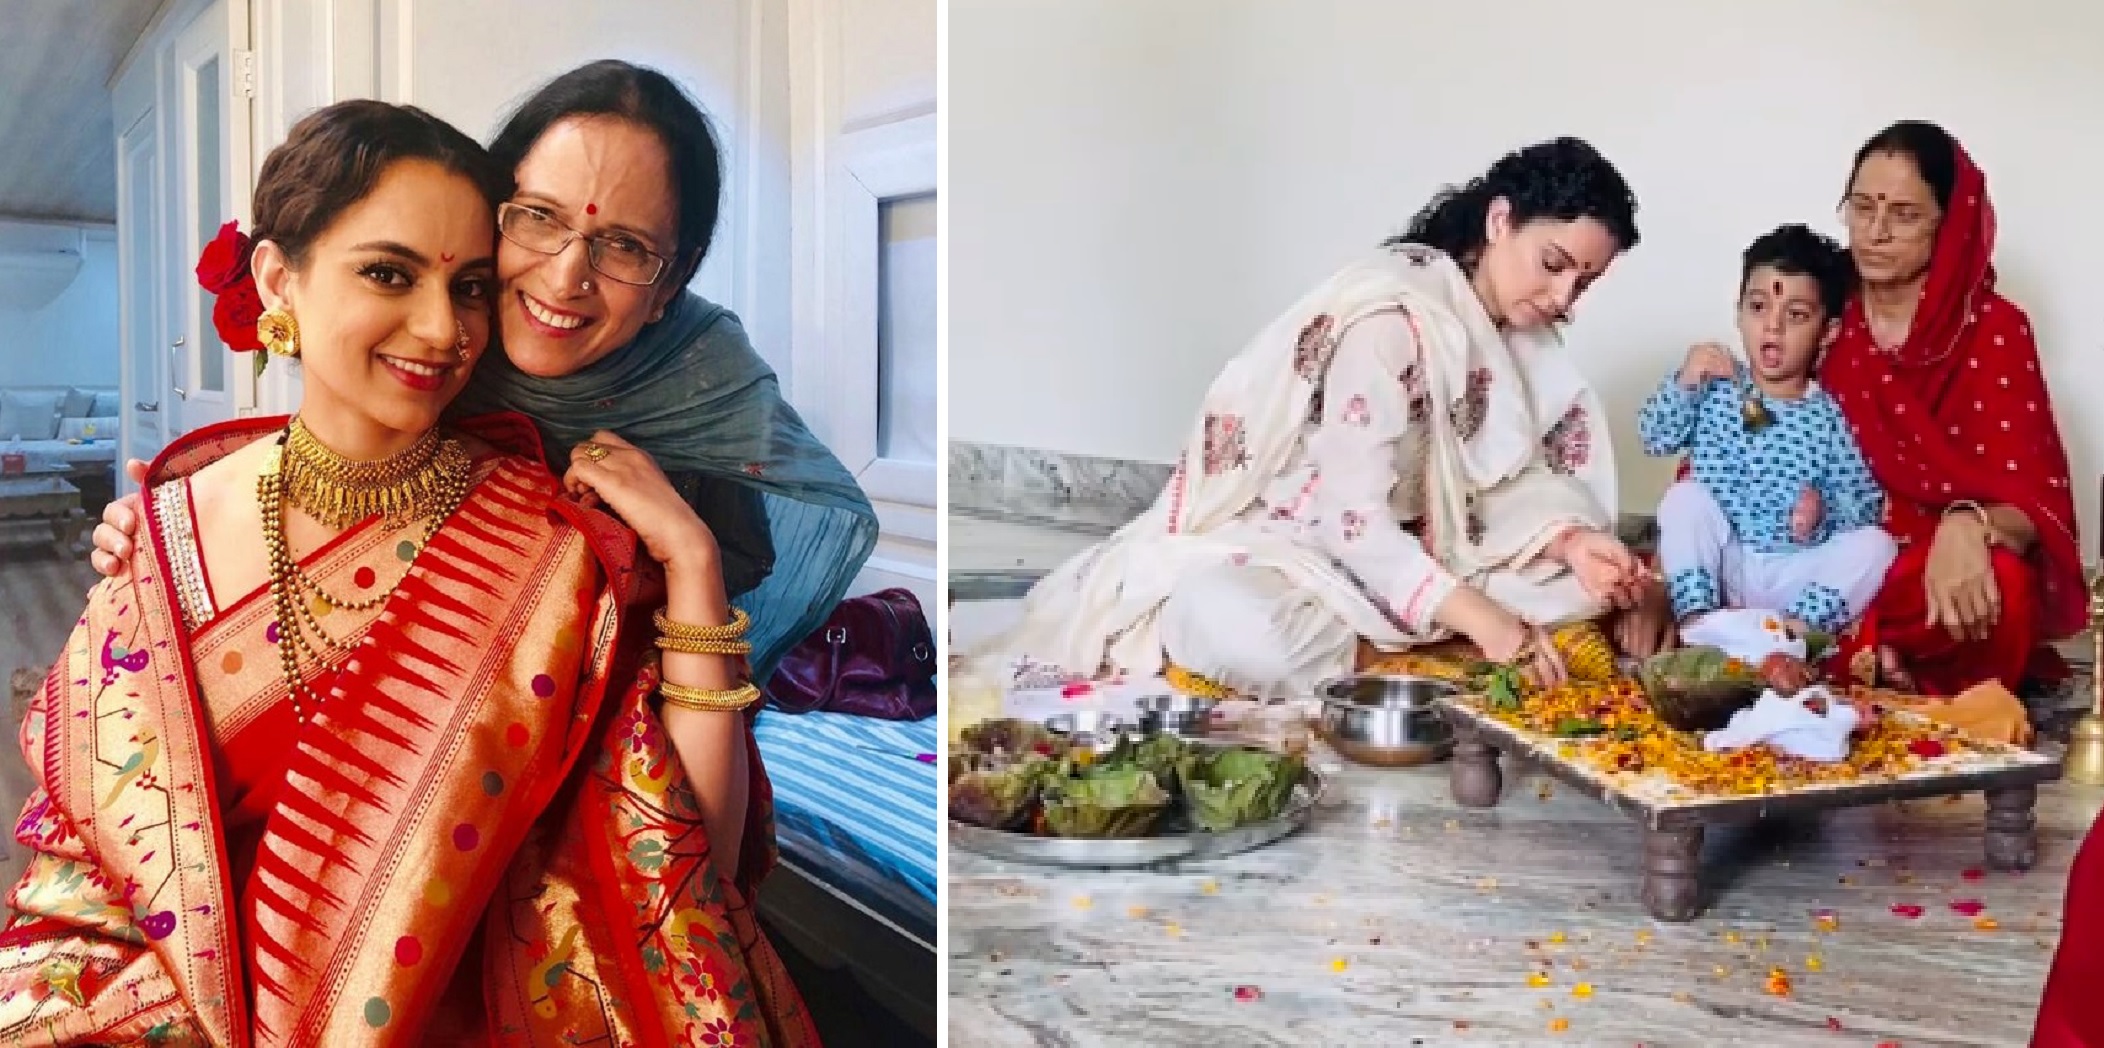 Worried About Her Safety, Kangana Ranaut’s Mother Hosts Mahamrityunjay Puja For Her